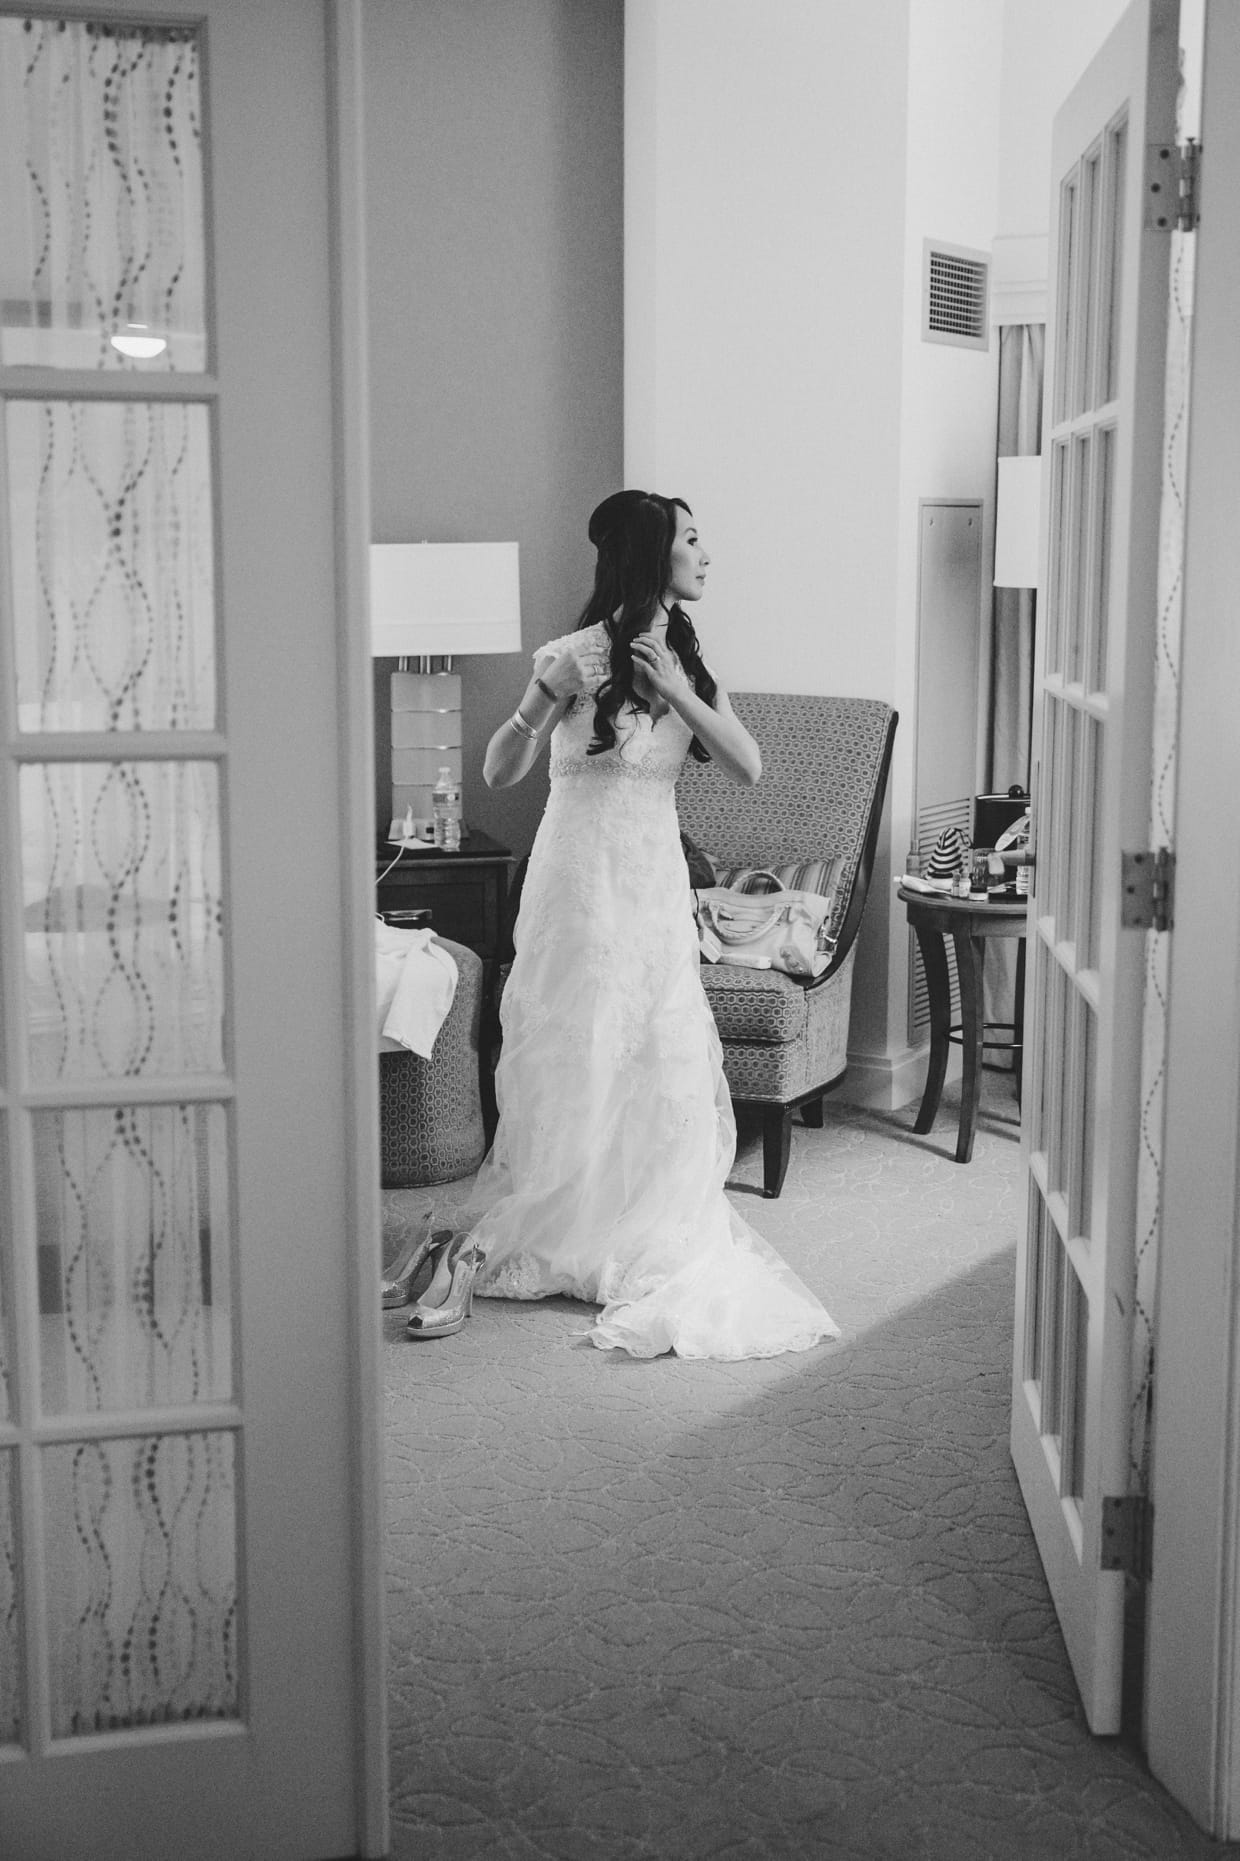 A documentary style photograph of a bride getting ready at the Boston Marriott Hotel